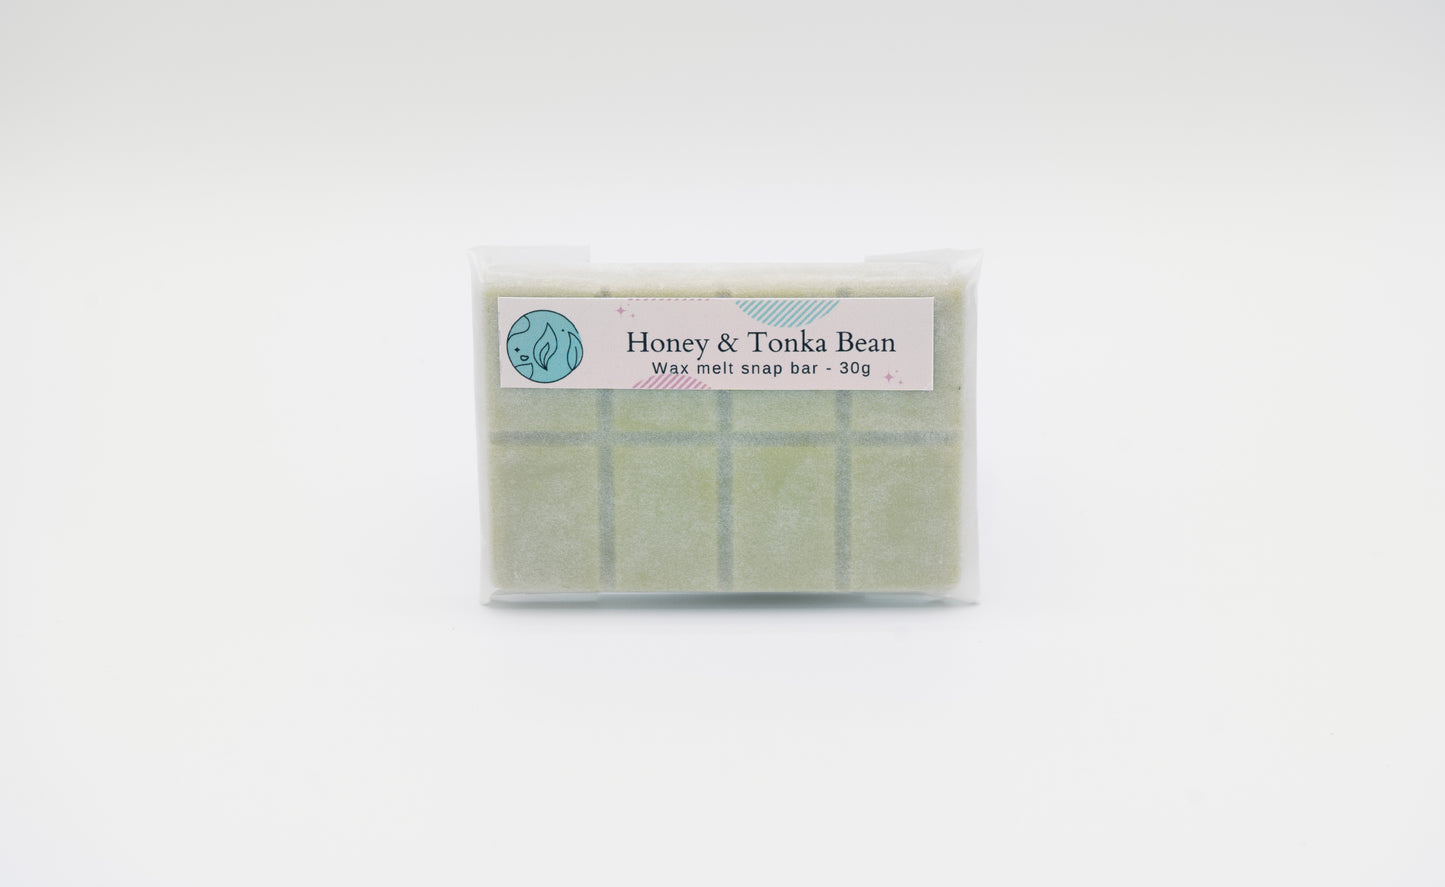 honey and tonka 30g or 90g strongly scented wax melt snap bars. Eco friendly waxed paper packaging. Brighton Rock Workshop wax melts made in Spain and the United Kingdom, available in two sizes. Suitable for tea light or electric burners